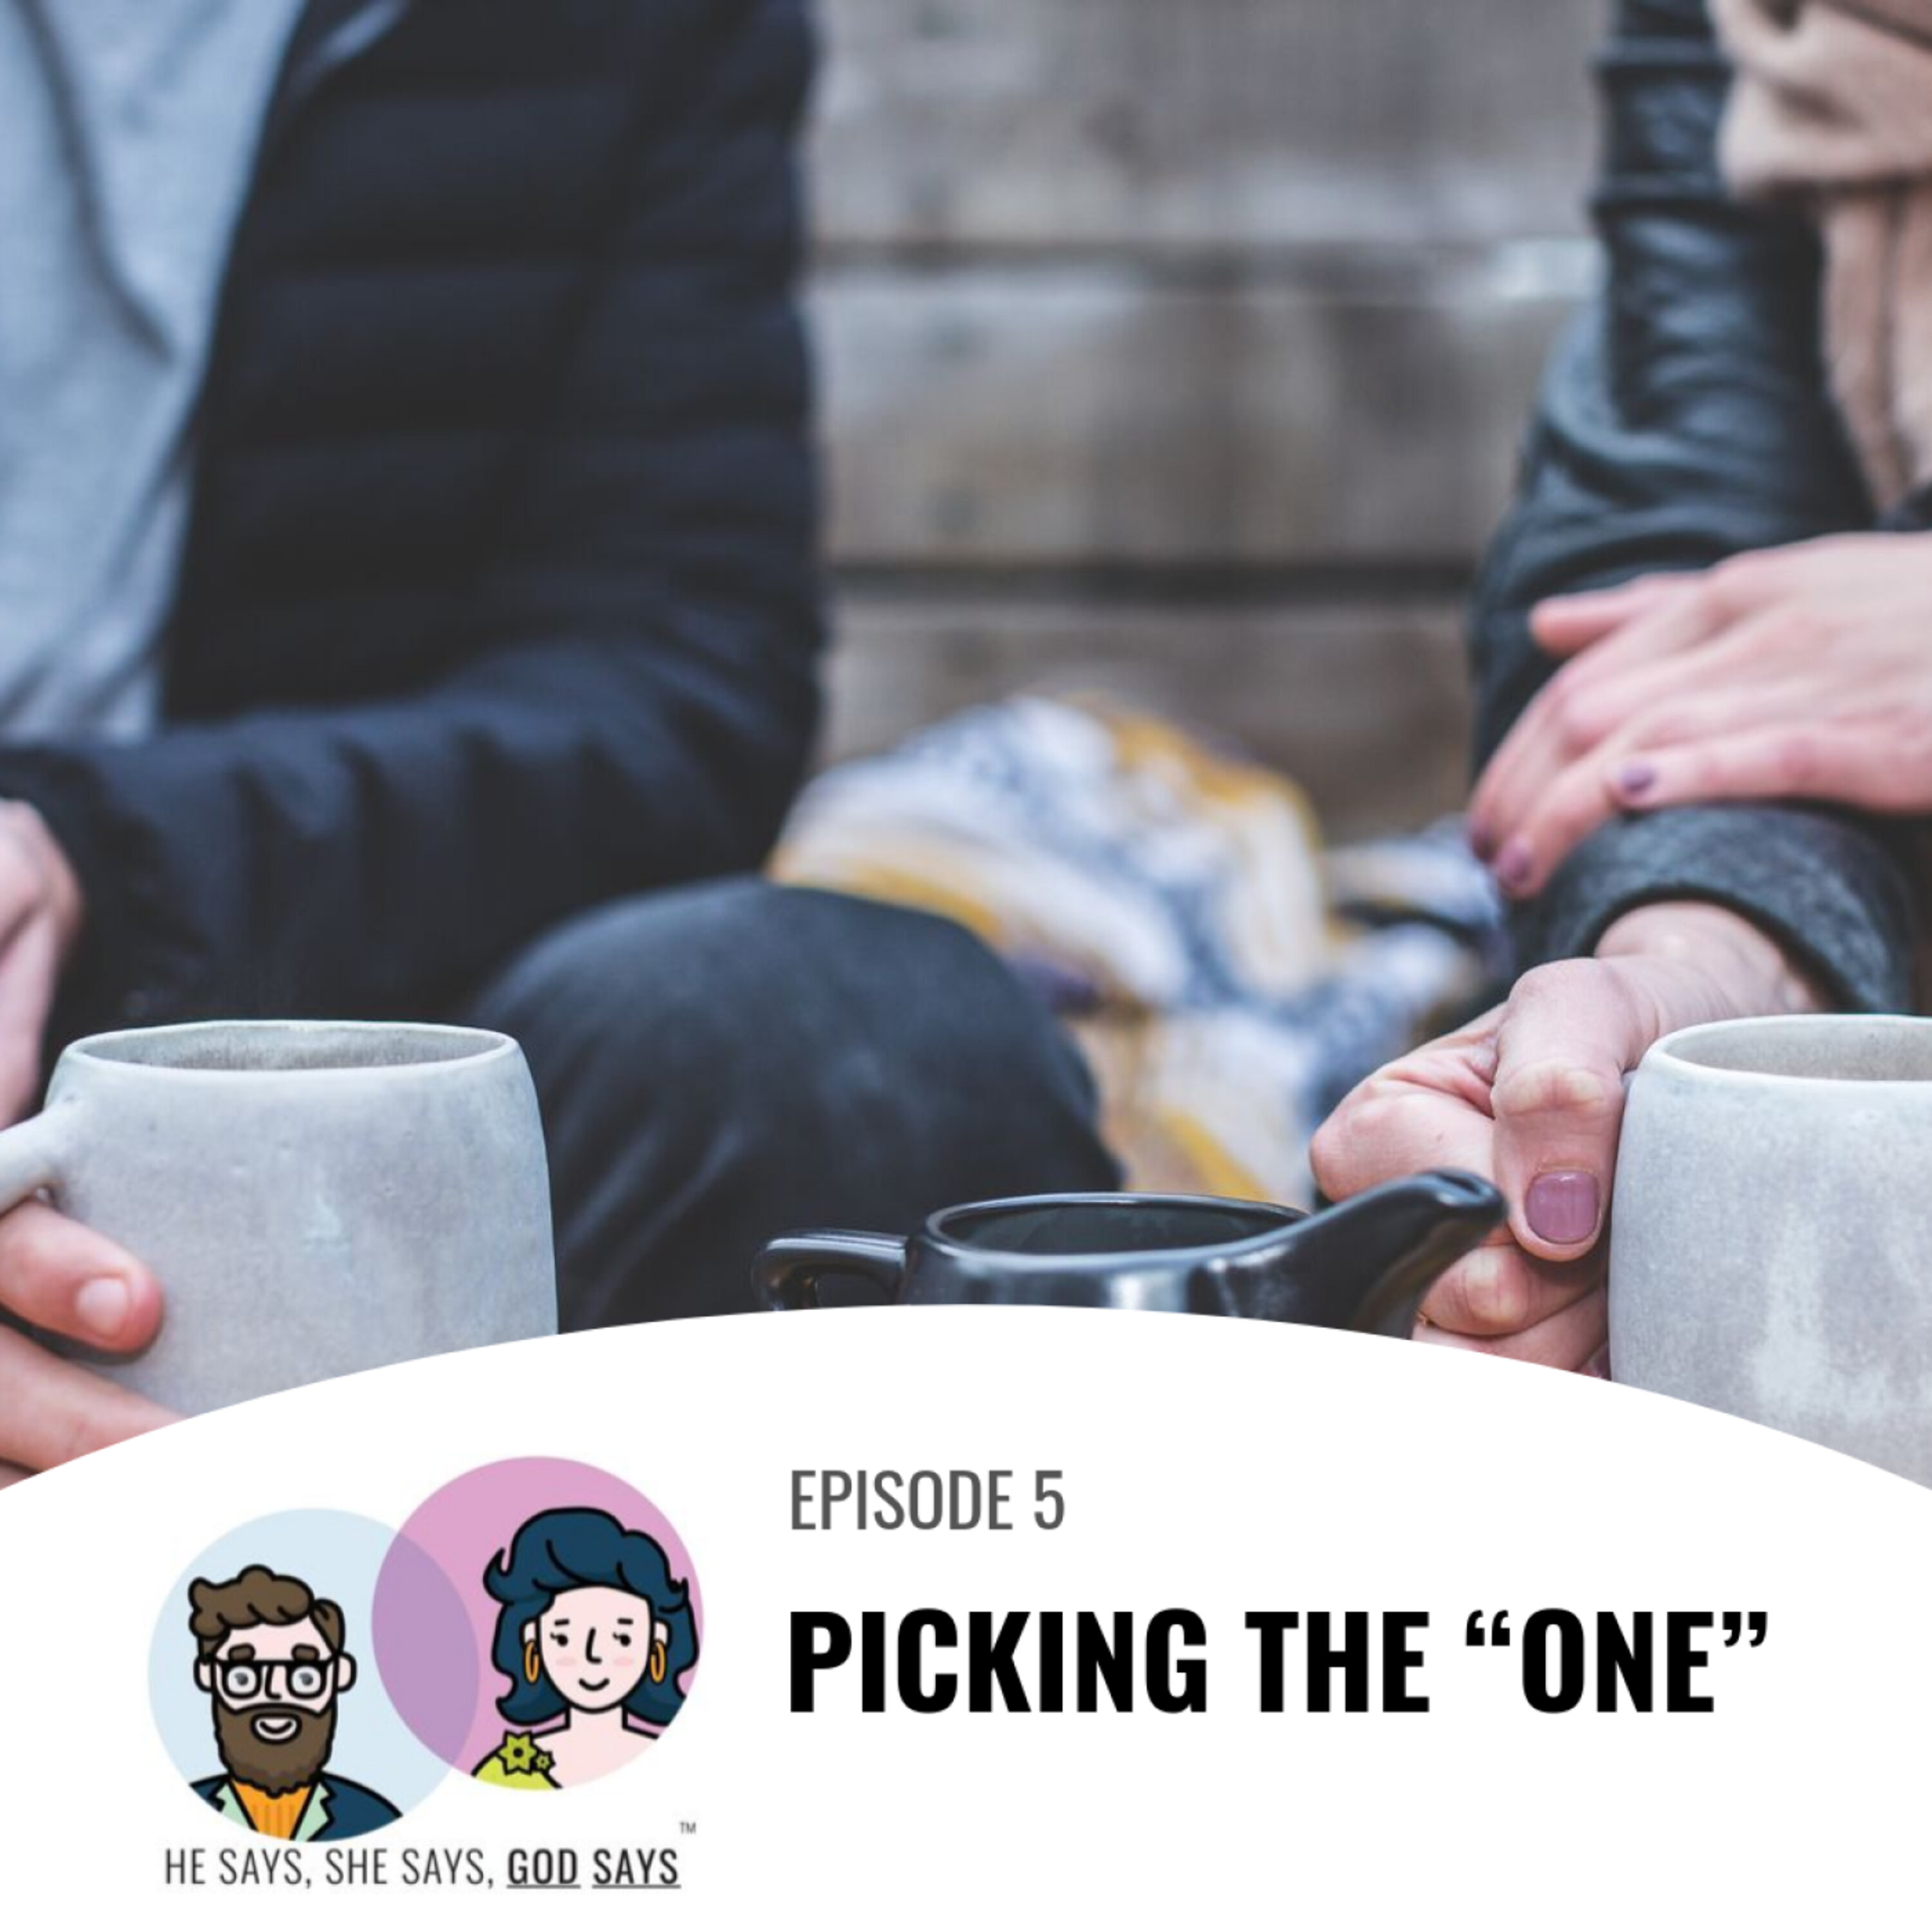 Picking the ”One”